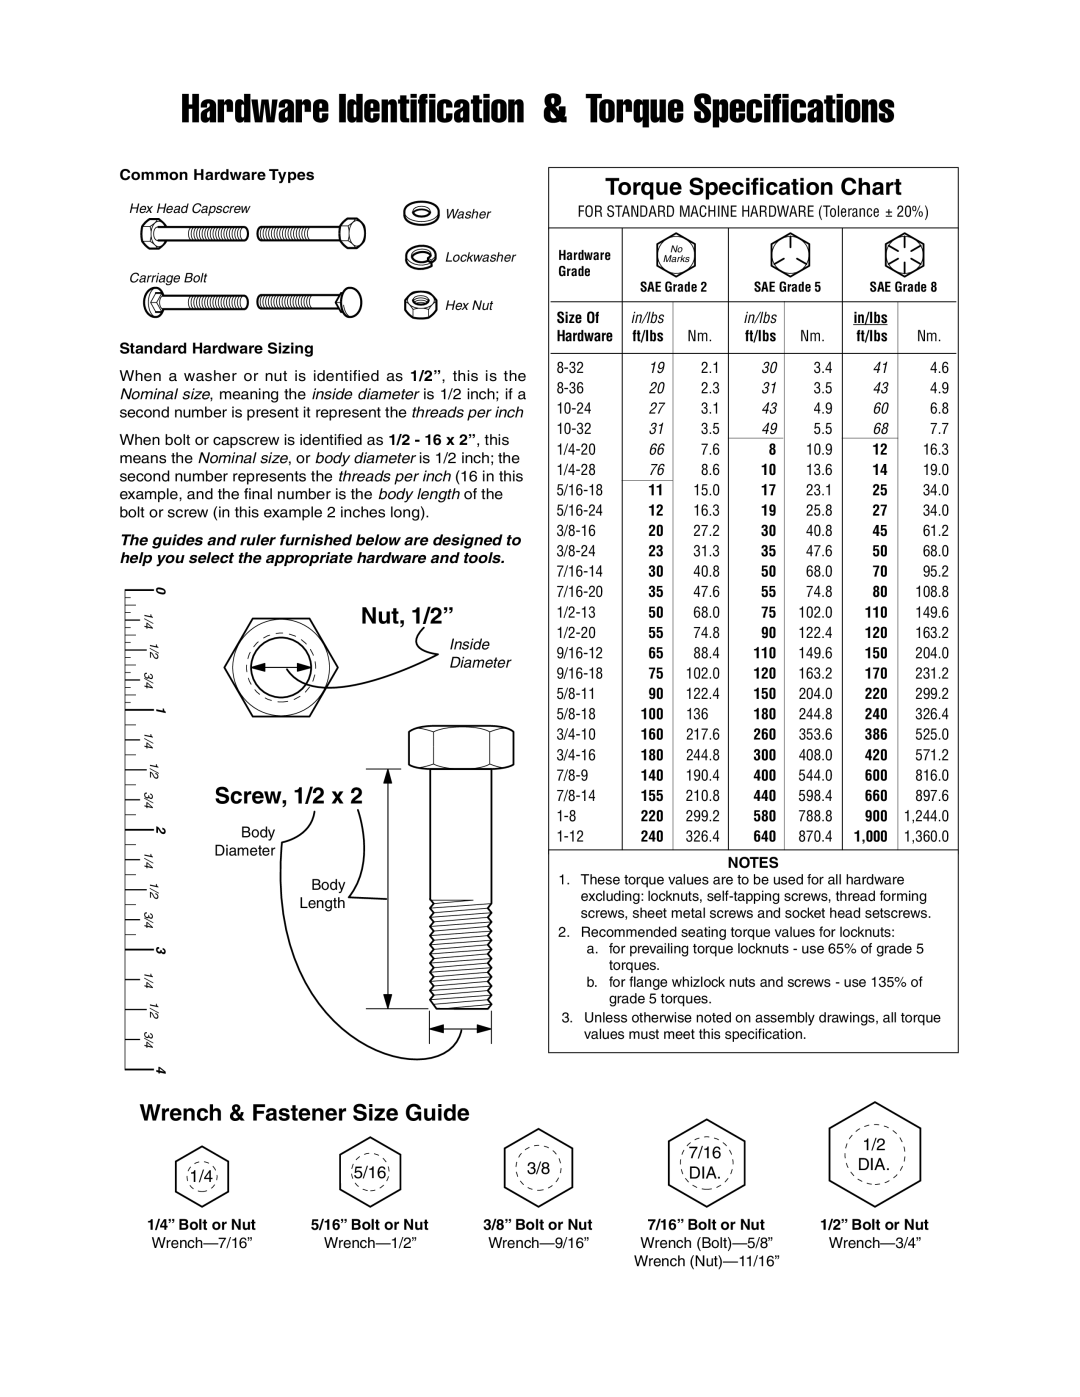 Snapper 4572 Wrench & Fastener Size Guide, Hardware Identification & Torque Specifications, Torque Specification Chart 